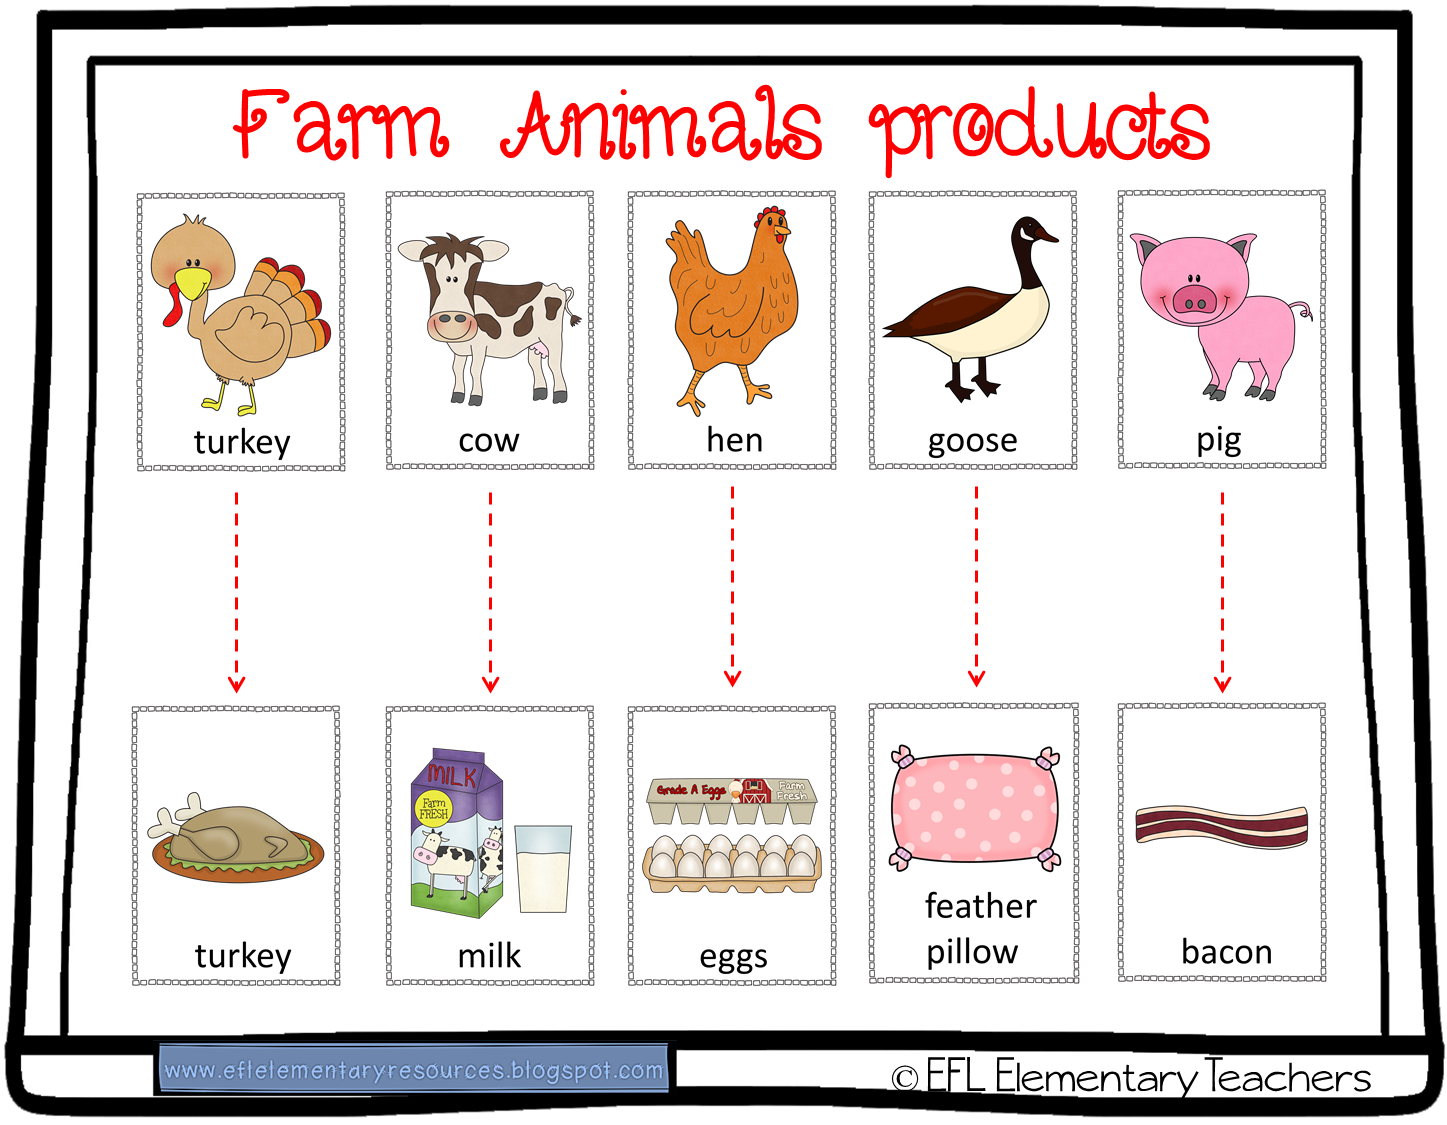 What are good games. Farm animals and products. What Farm animals eat. Farm animals products for Kids. ESL activity Farm animals for Kids.